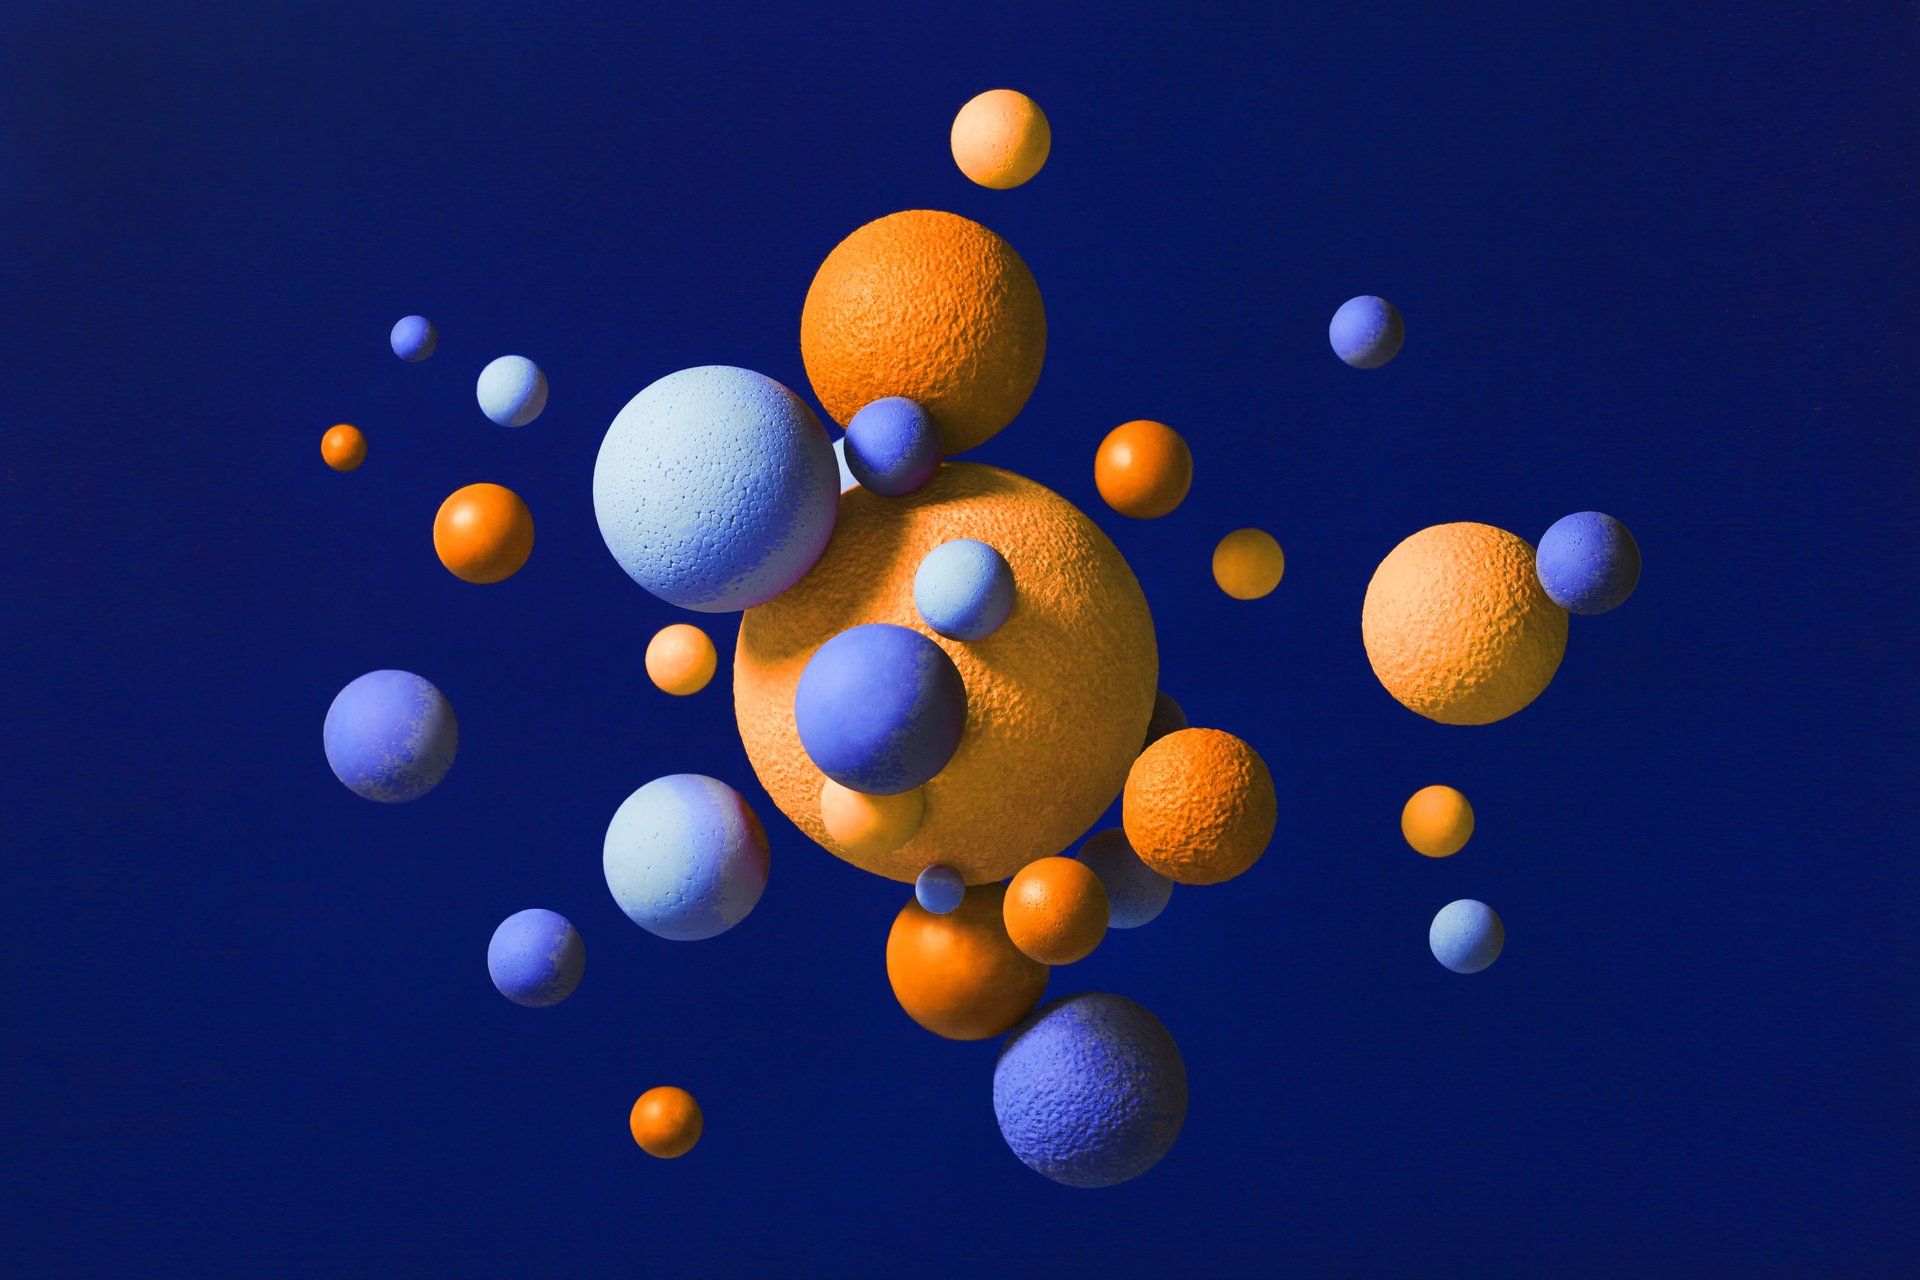 Abstract multi-colored spheres on blue background.